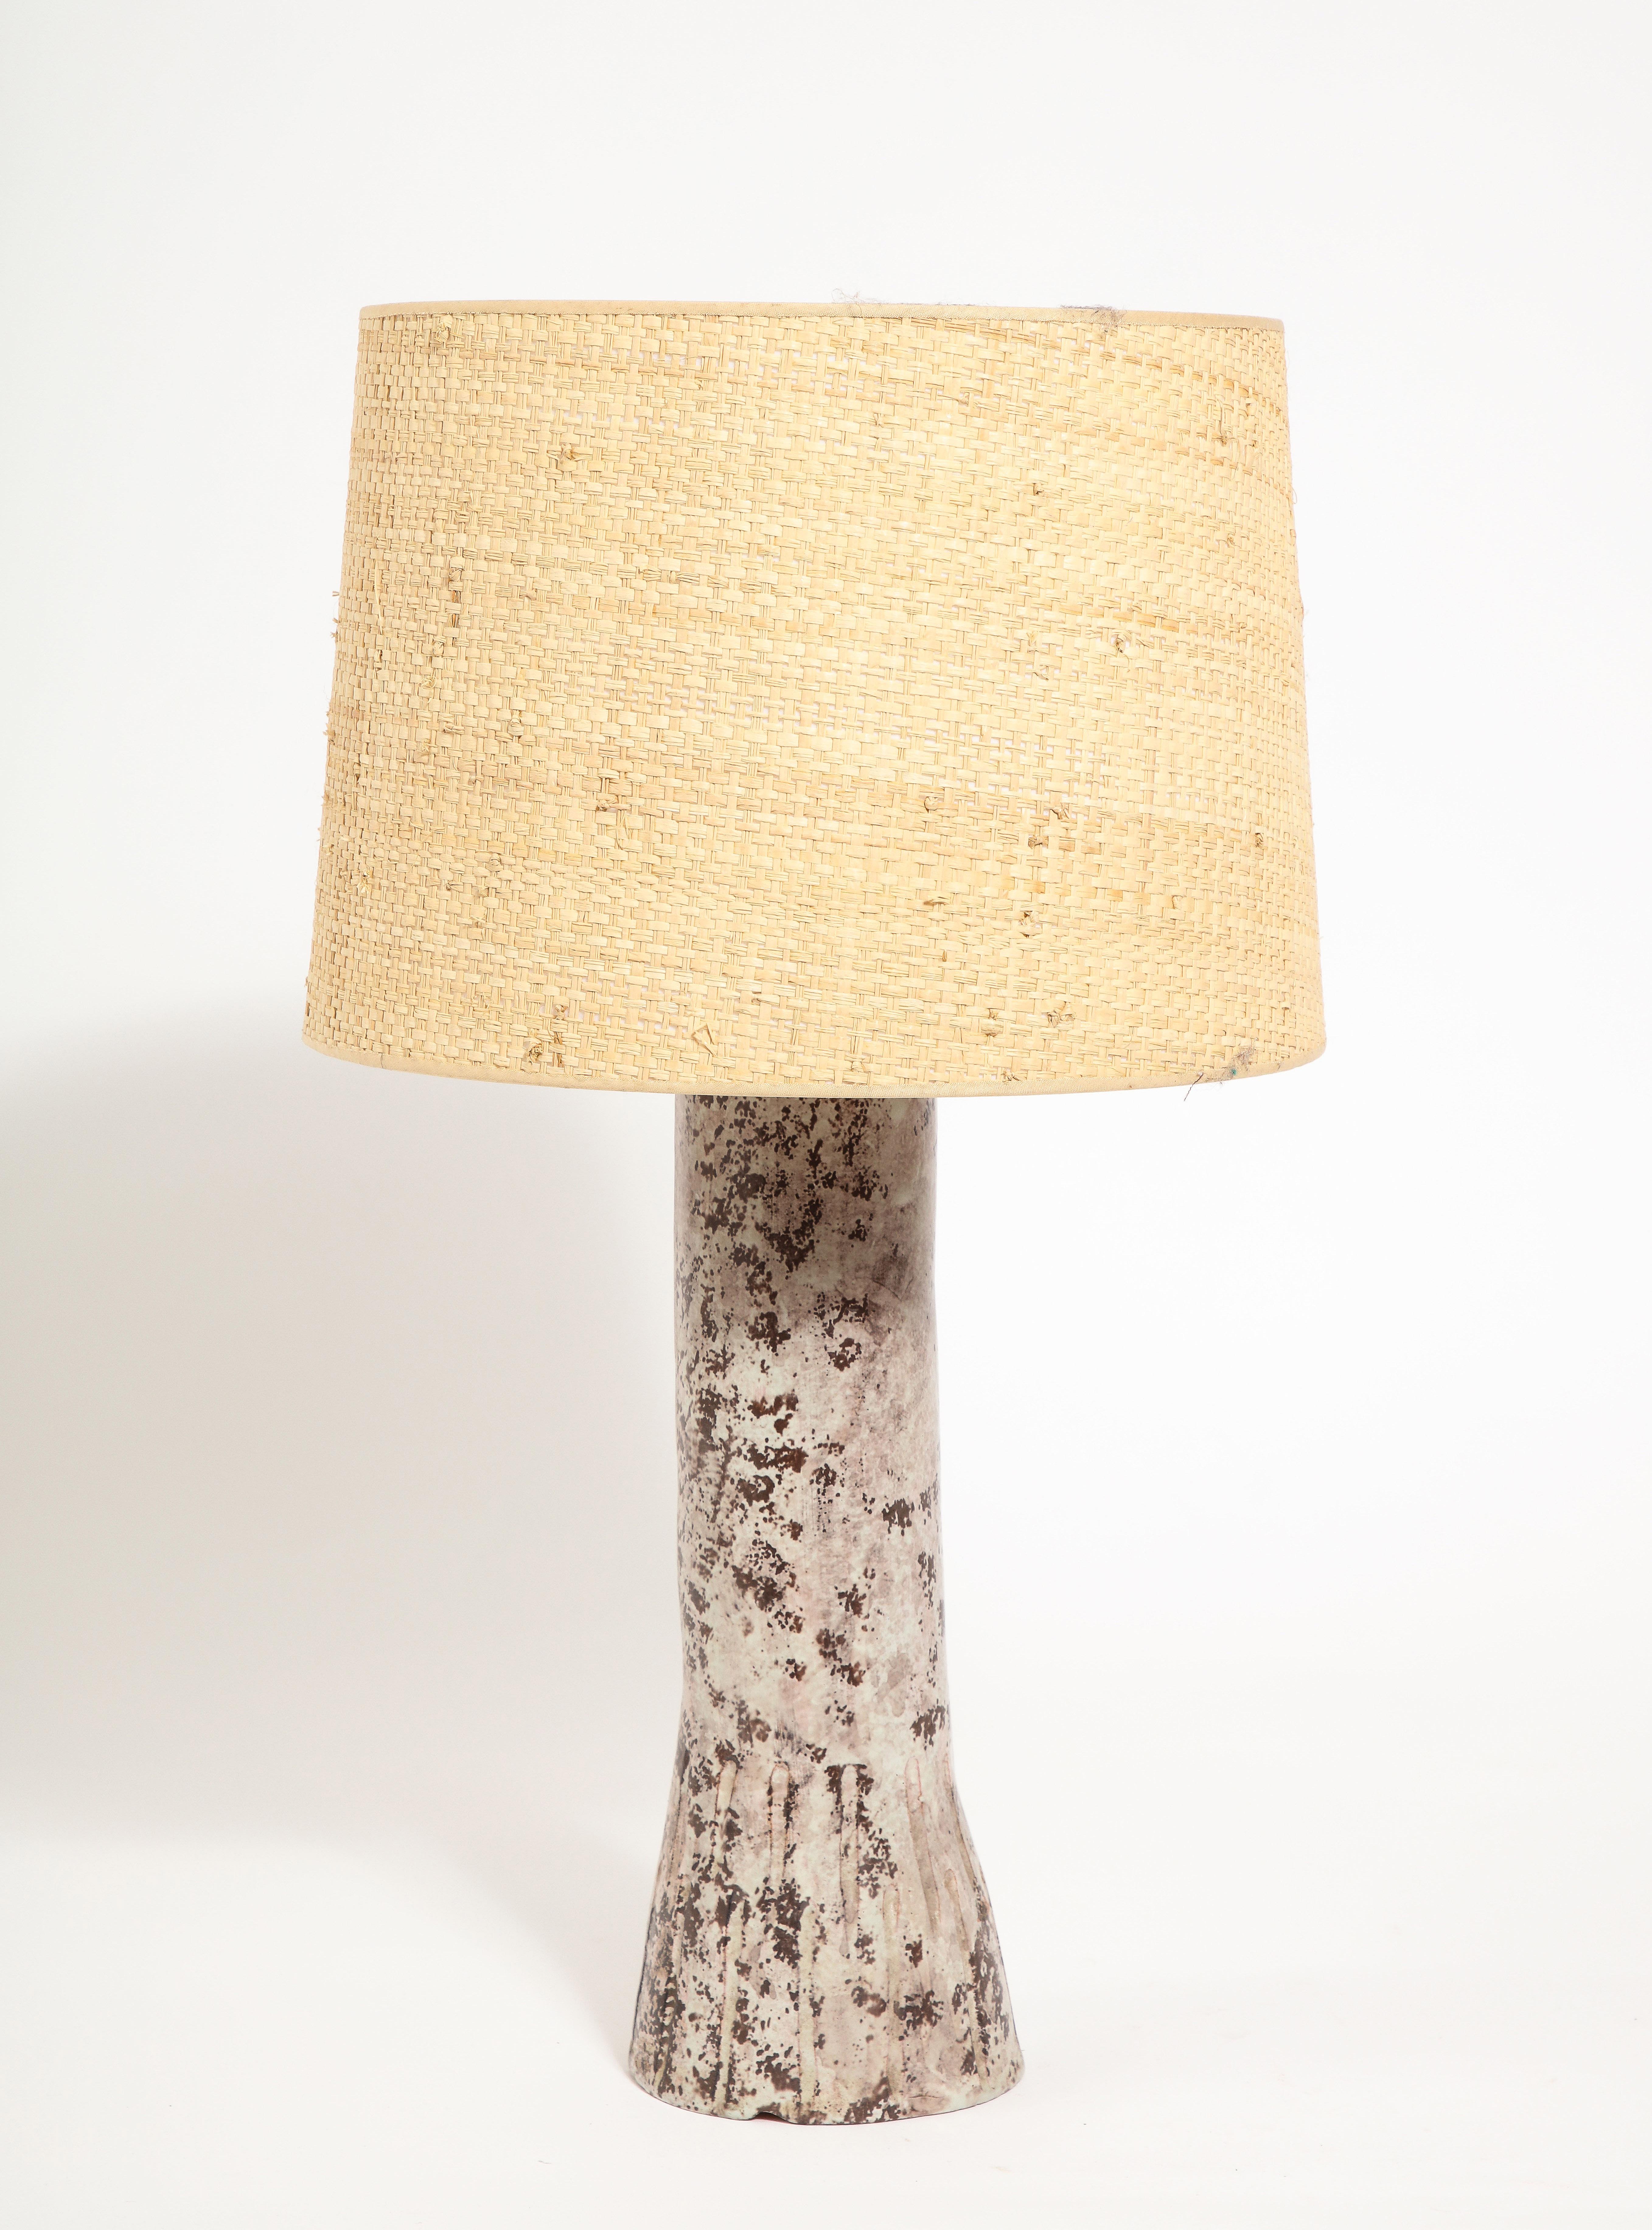 Mid-Century Modern Jacques Blin Ceramic Table Lamp, France 1950's For Sale